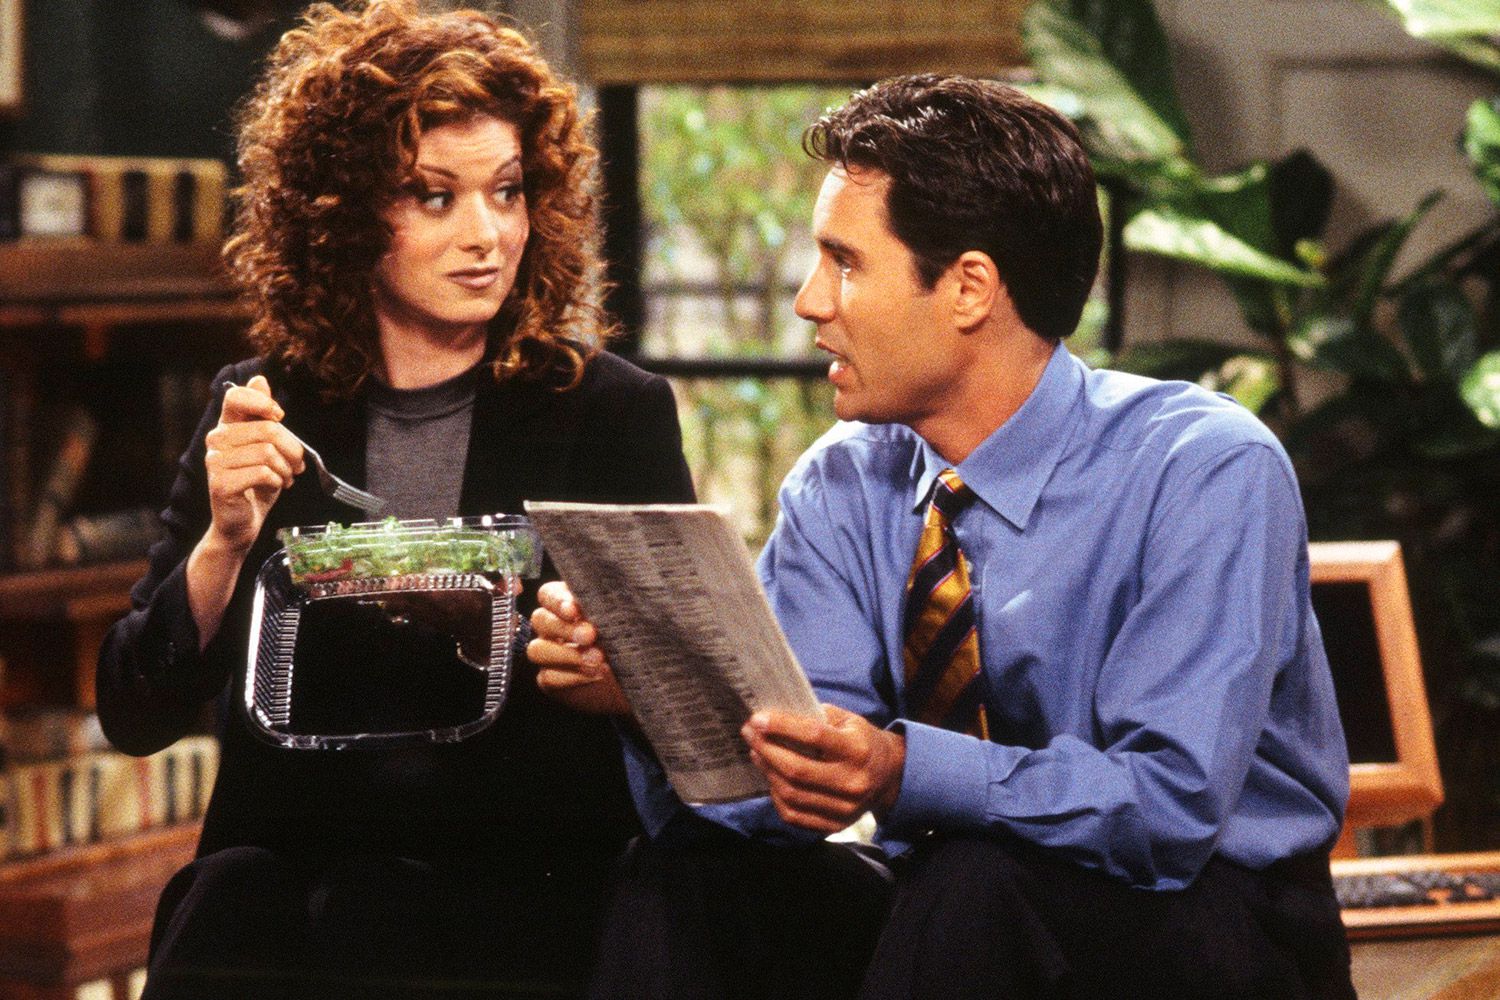 Do You Remember These TV Shows That Aired in the ’90s? Will & Grace